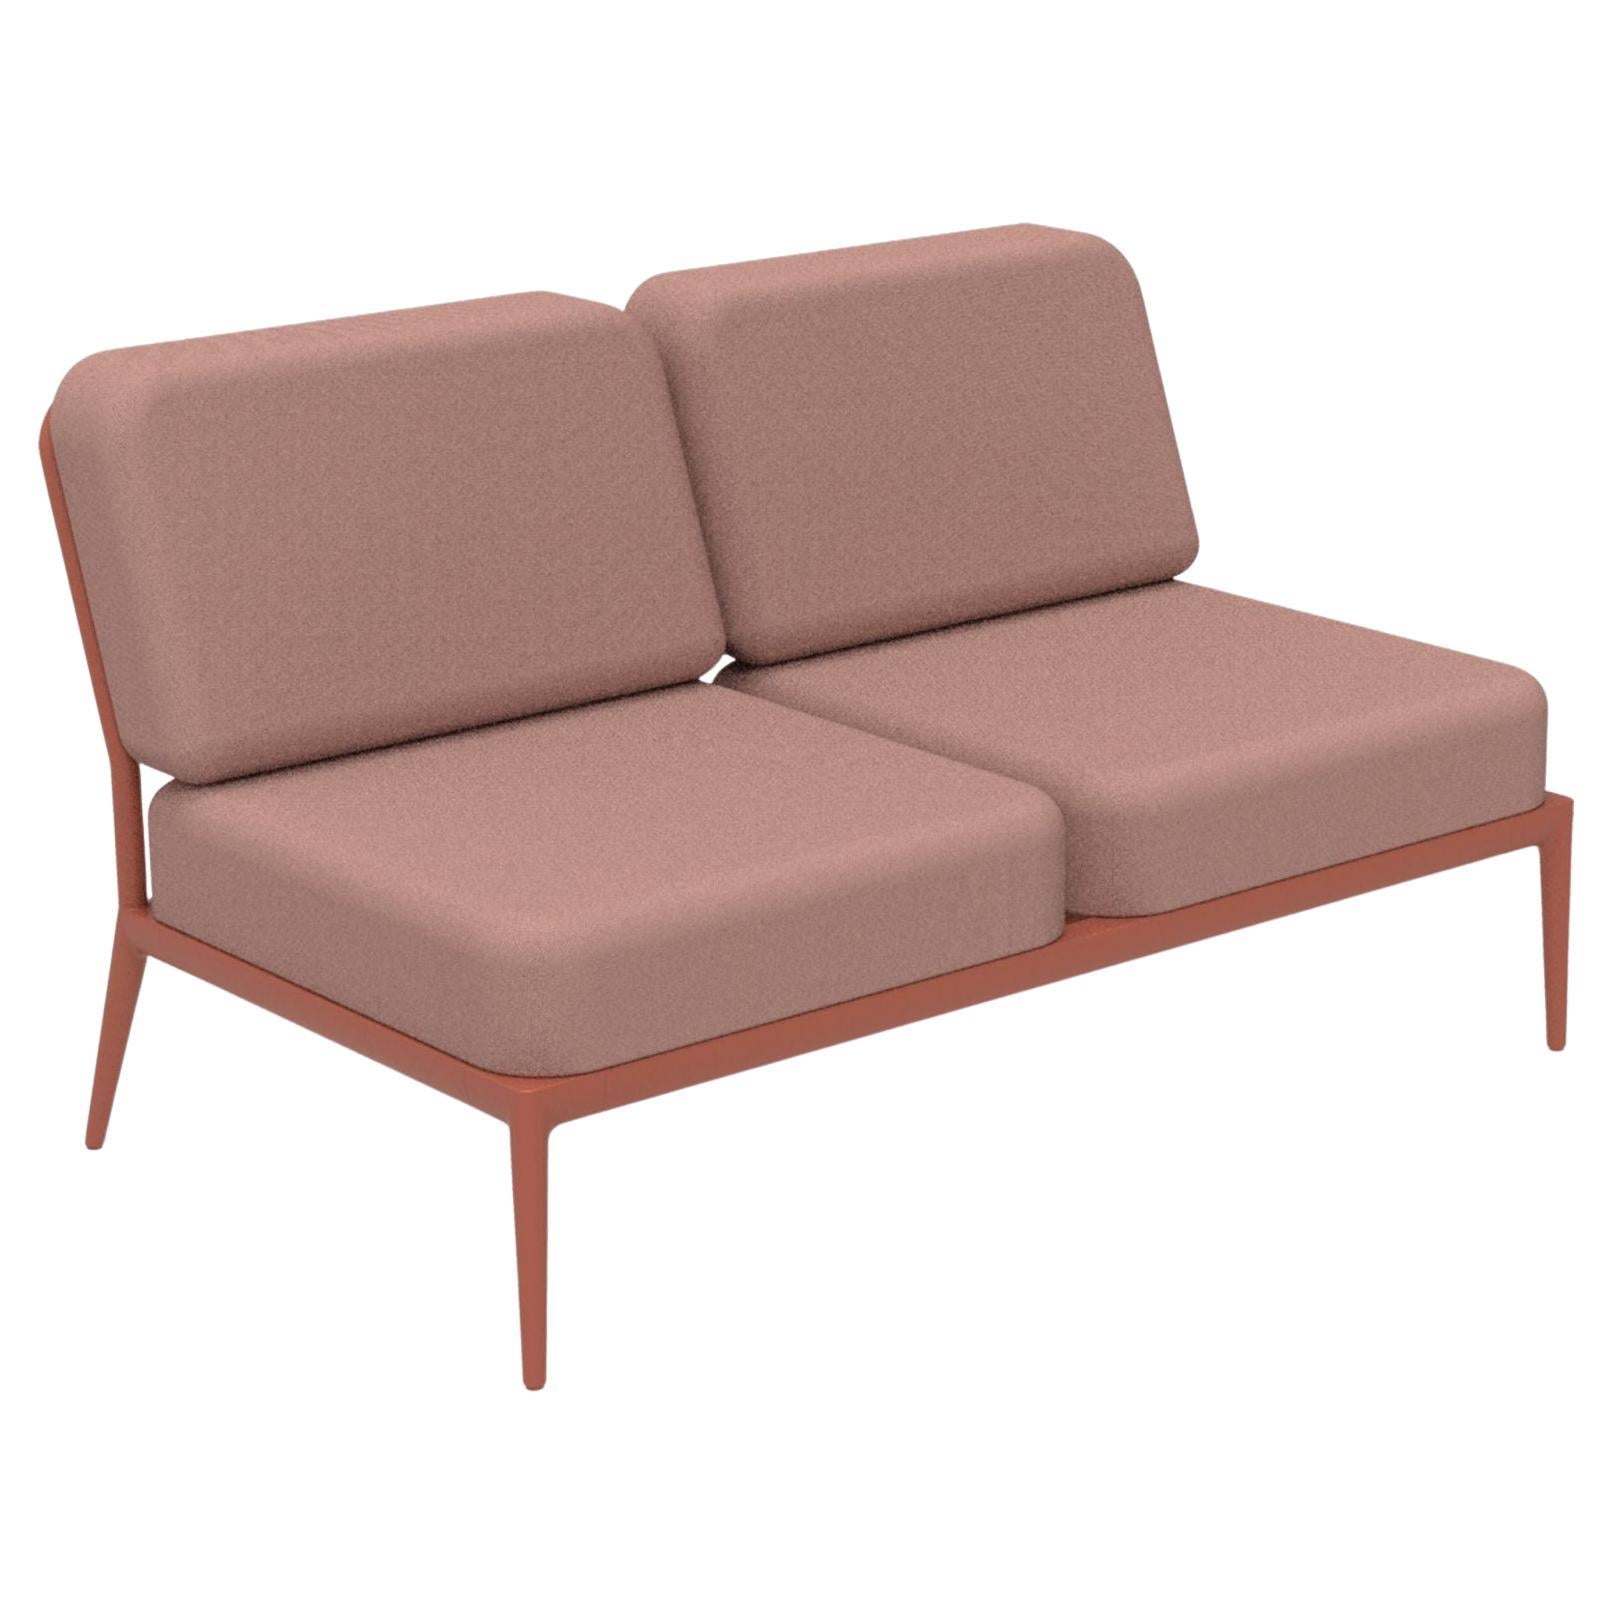 Nature Salmon Double Central Modular Sofa by Mowee For Sale